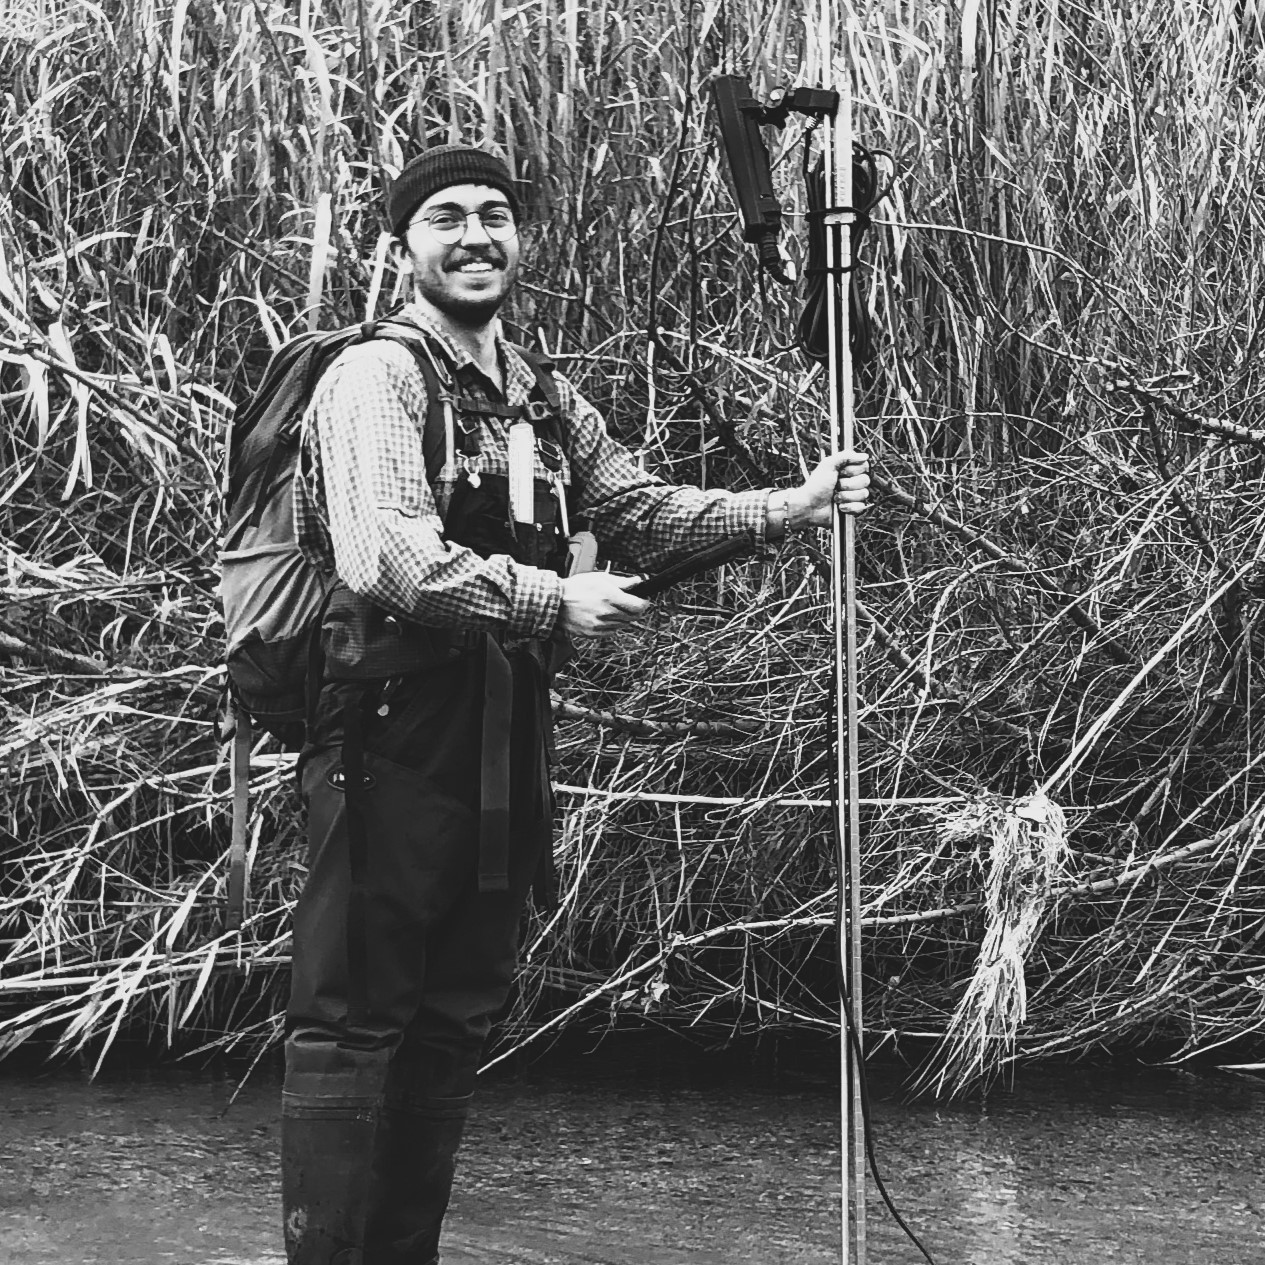 Field crew member Emerson Martin stands in a stream, holding water quality monitoring equipment.